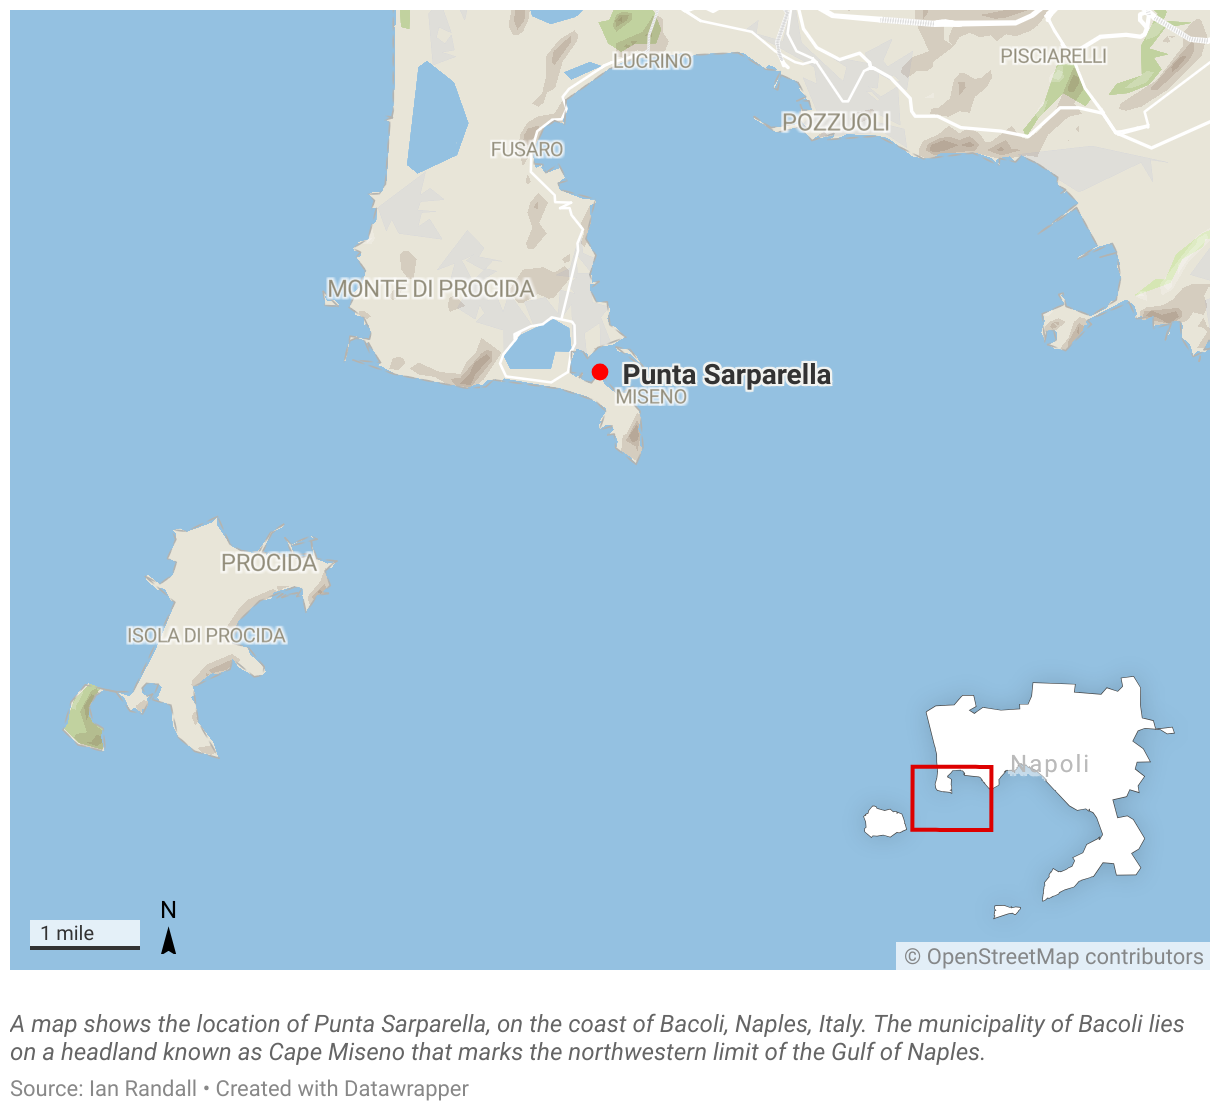 A map shows the location of Punta Sarparella, on the coast of Bacoli, Naples, Italy.